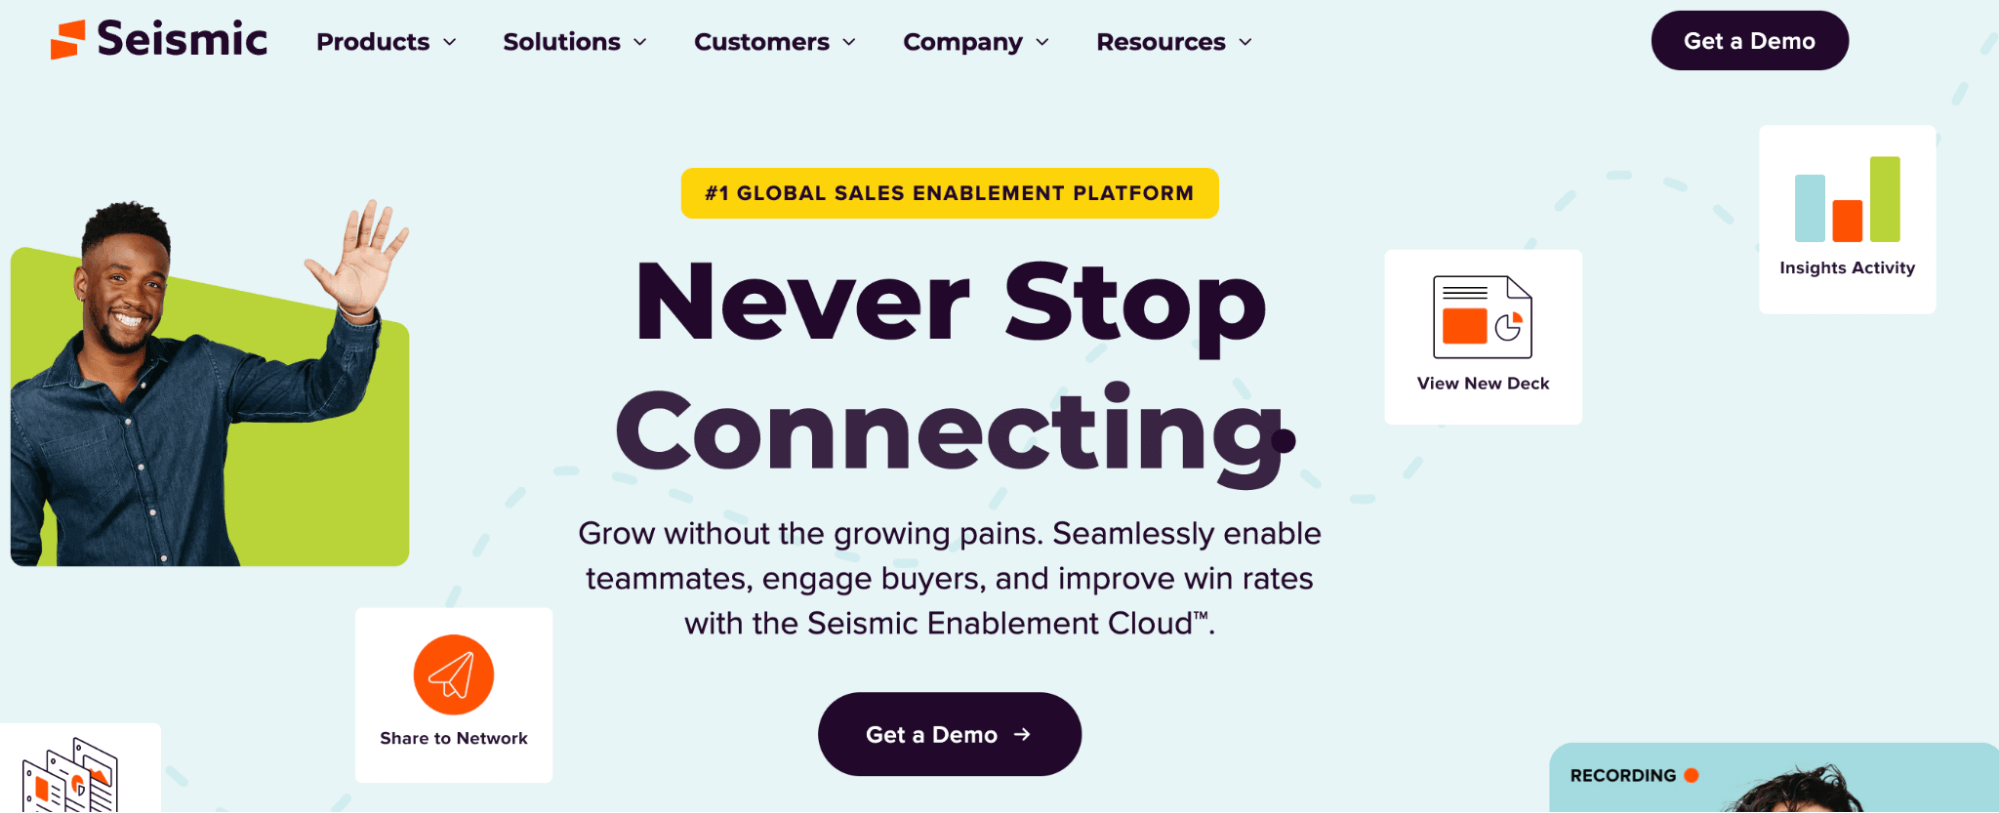 The homepage for Seismic